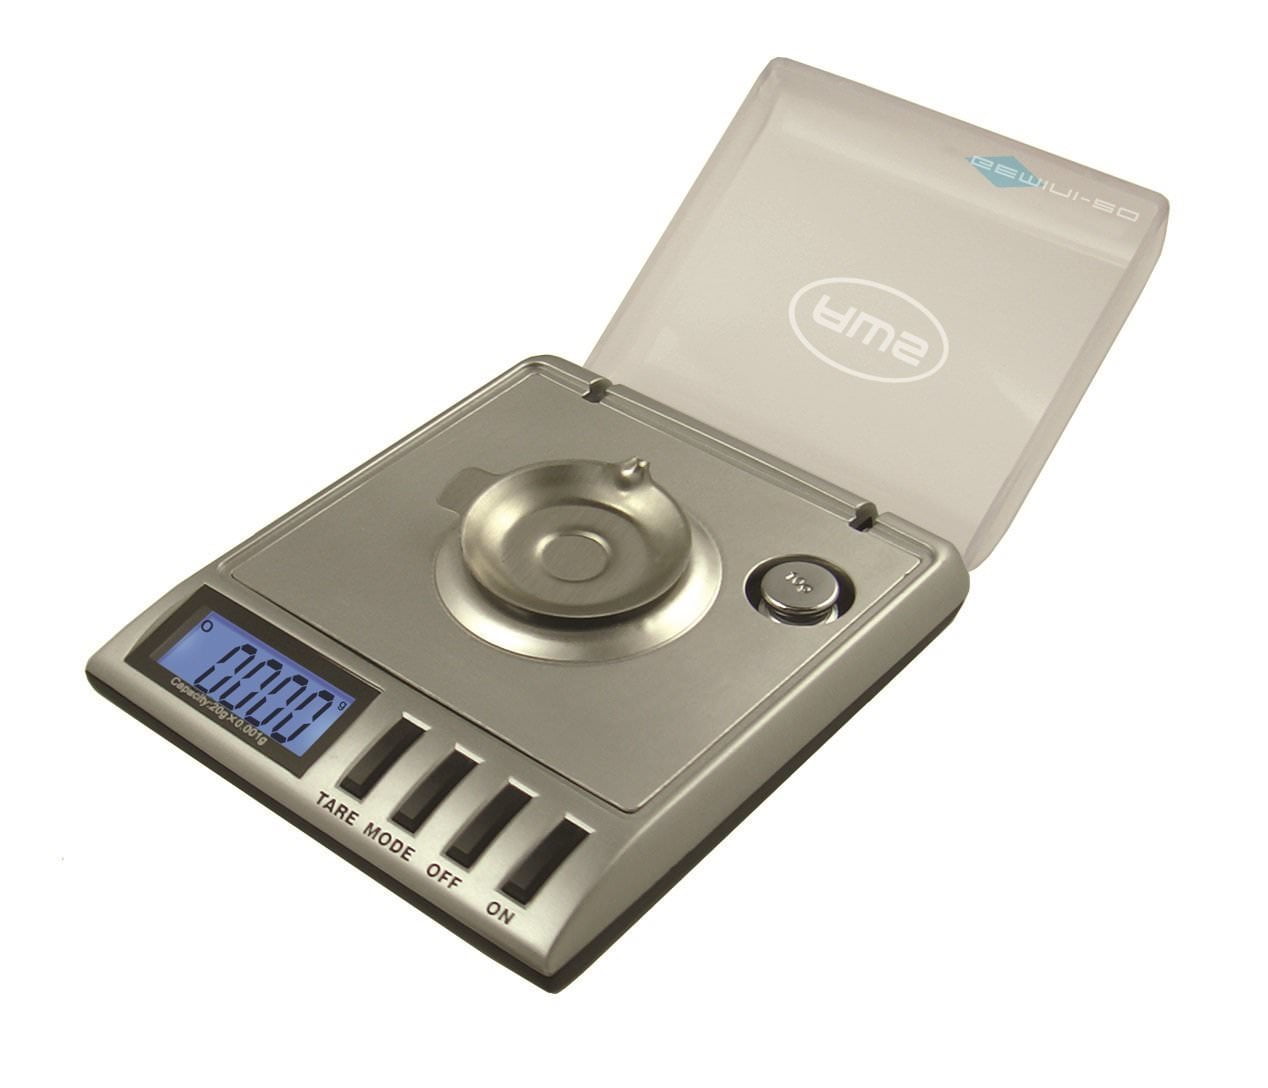 Triton T3 Digital Scale  Cheese Making Supply Co.